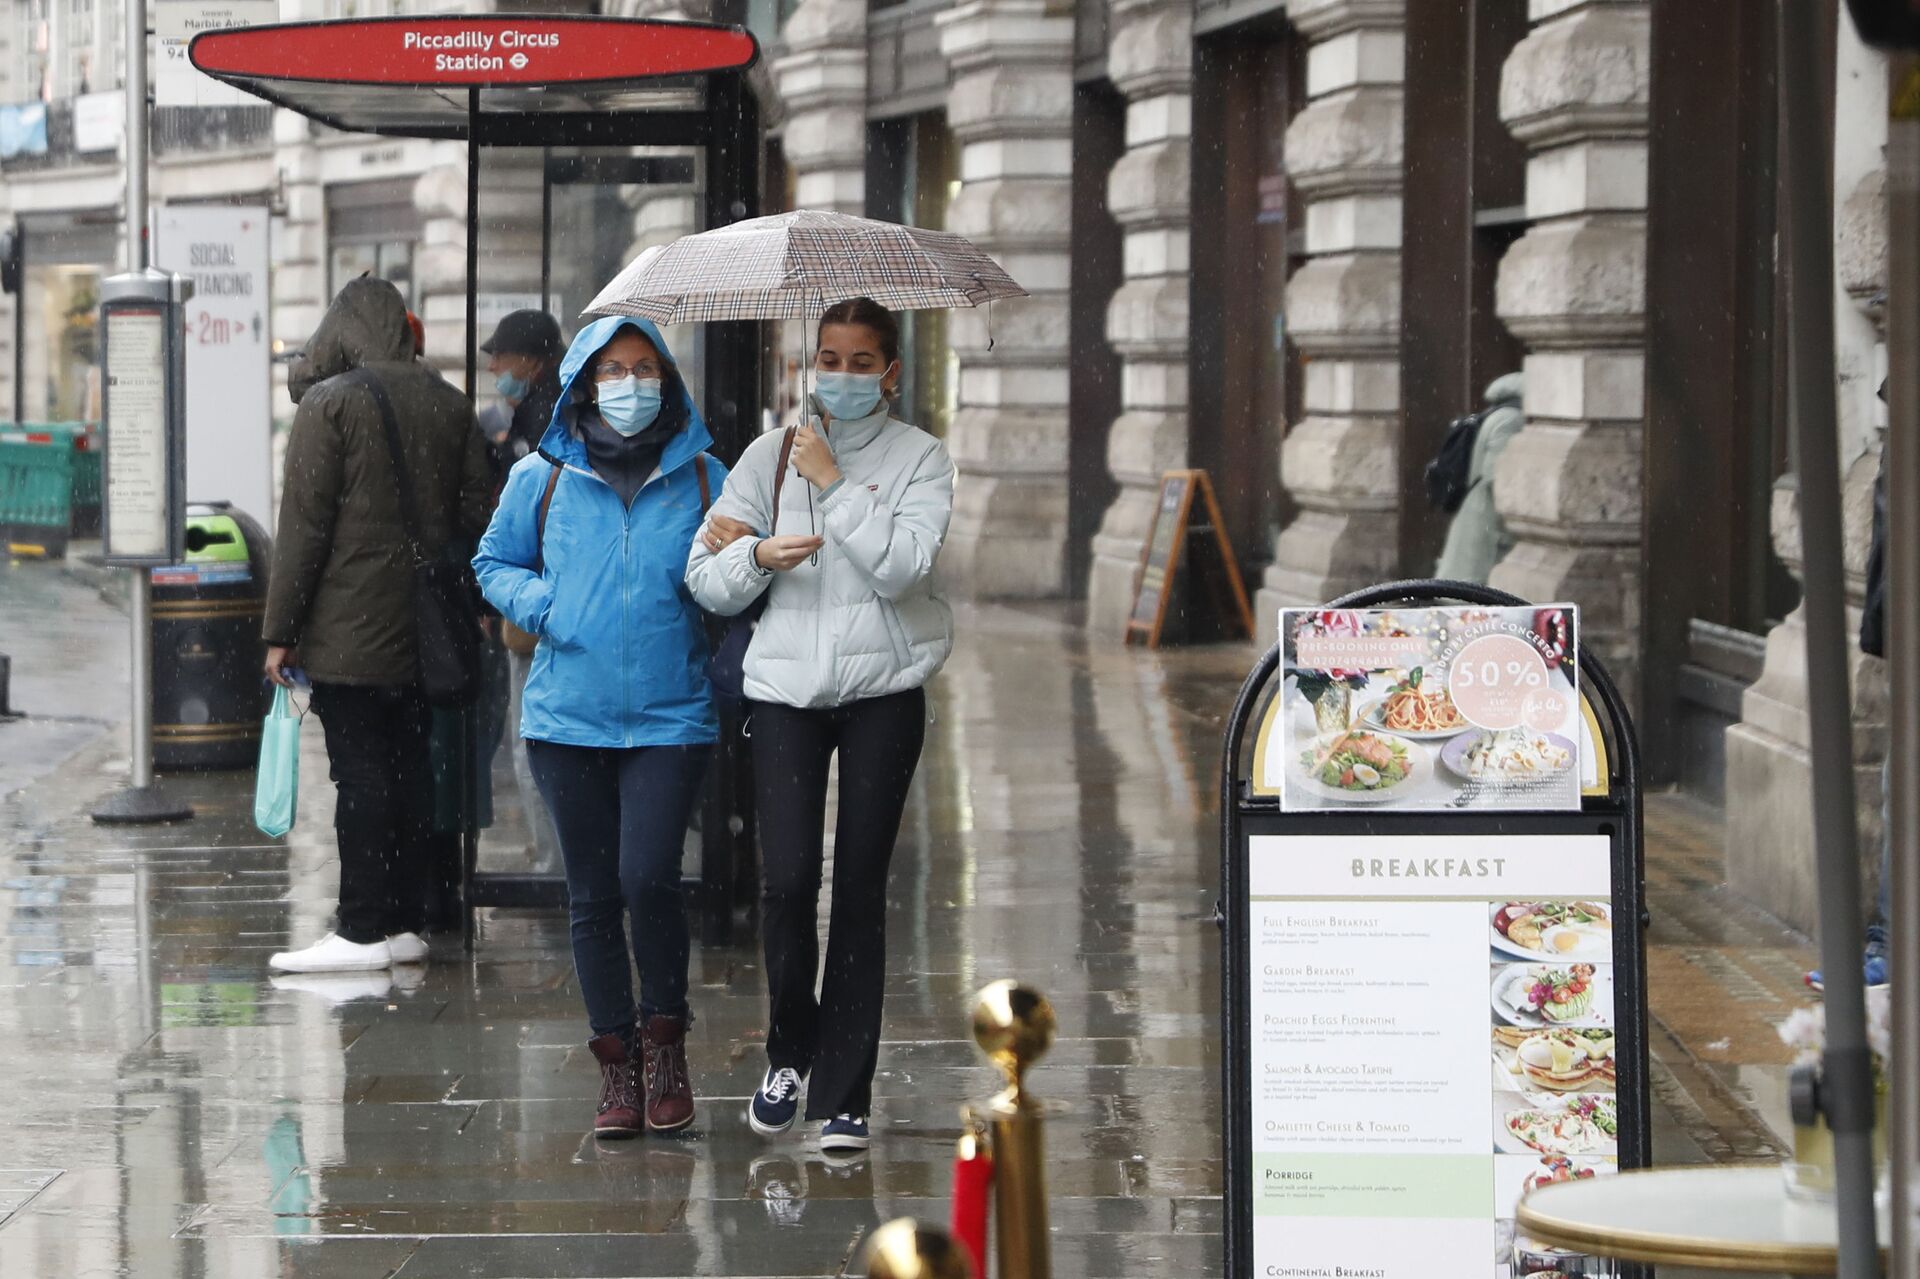 People wearing masks to help prevent the spread of the coronavirus walk along Regent Street in London, Thursday, Oct. 29, 2020. Around 100,000 people are catching the coronavirus every day in England, according to the latest Imperial College London study.  - Sputnik International, 1920, 22.10.2021